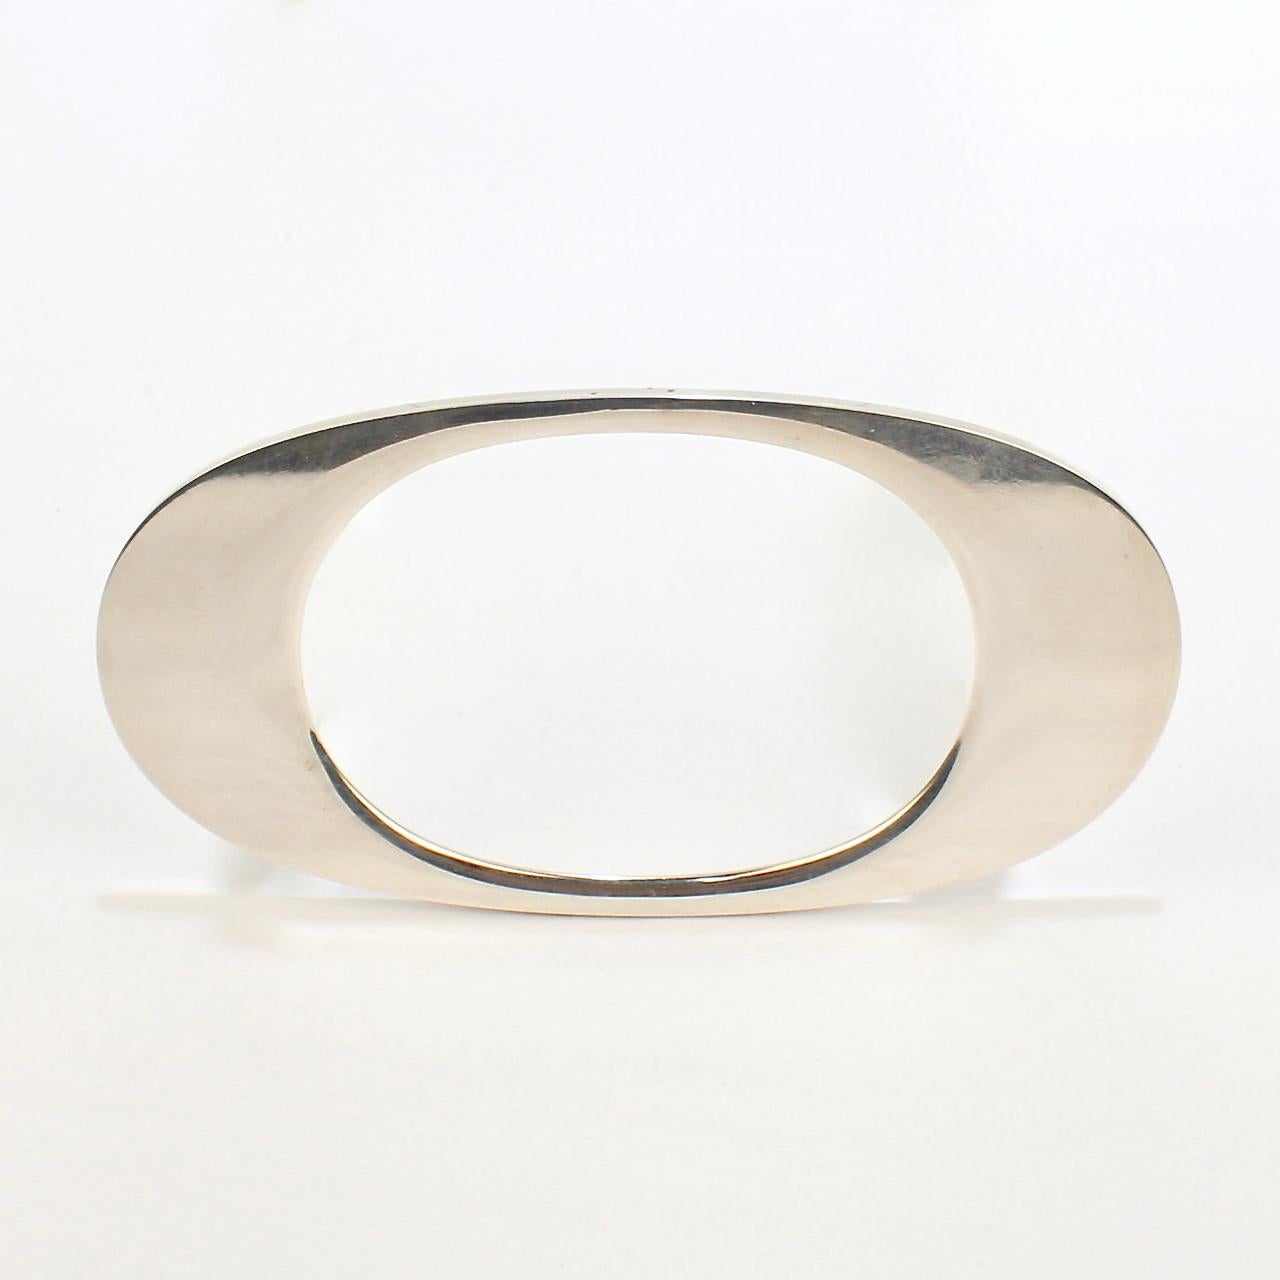 A very fine Wladis bangle bracelet.

Of slender, lozenge form in sterling silver. 

By Vladimir Peter for Wladis Gallery in Budapest, Hungary.

Great cutting-edge art jewelry!

Date:
20th Century

Overall Condition:
It is in overall good,